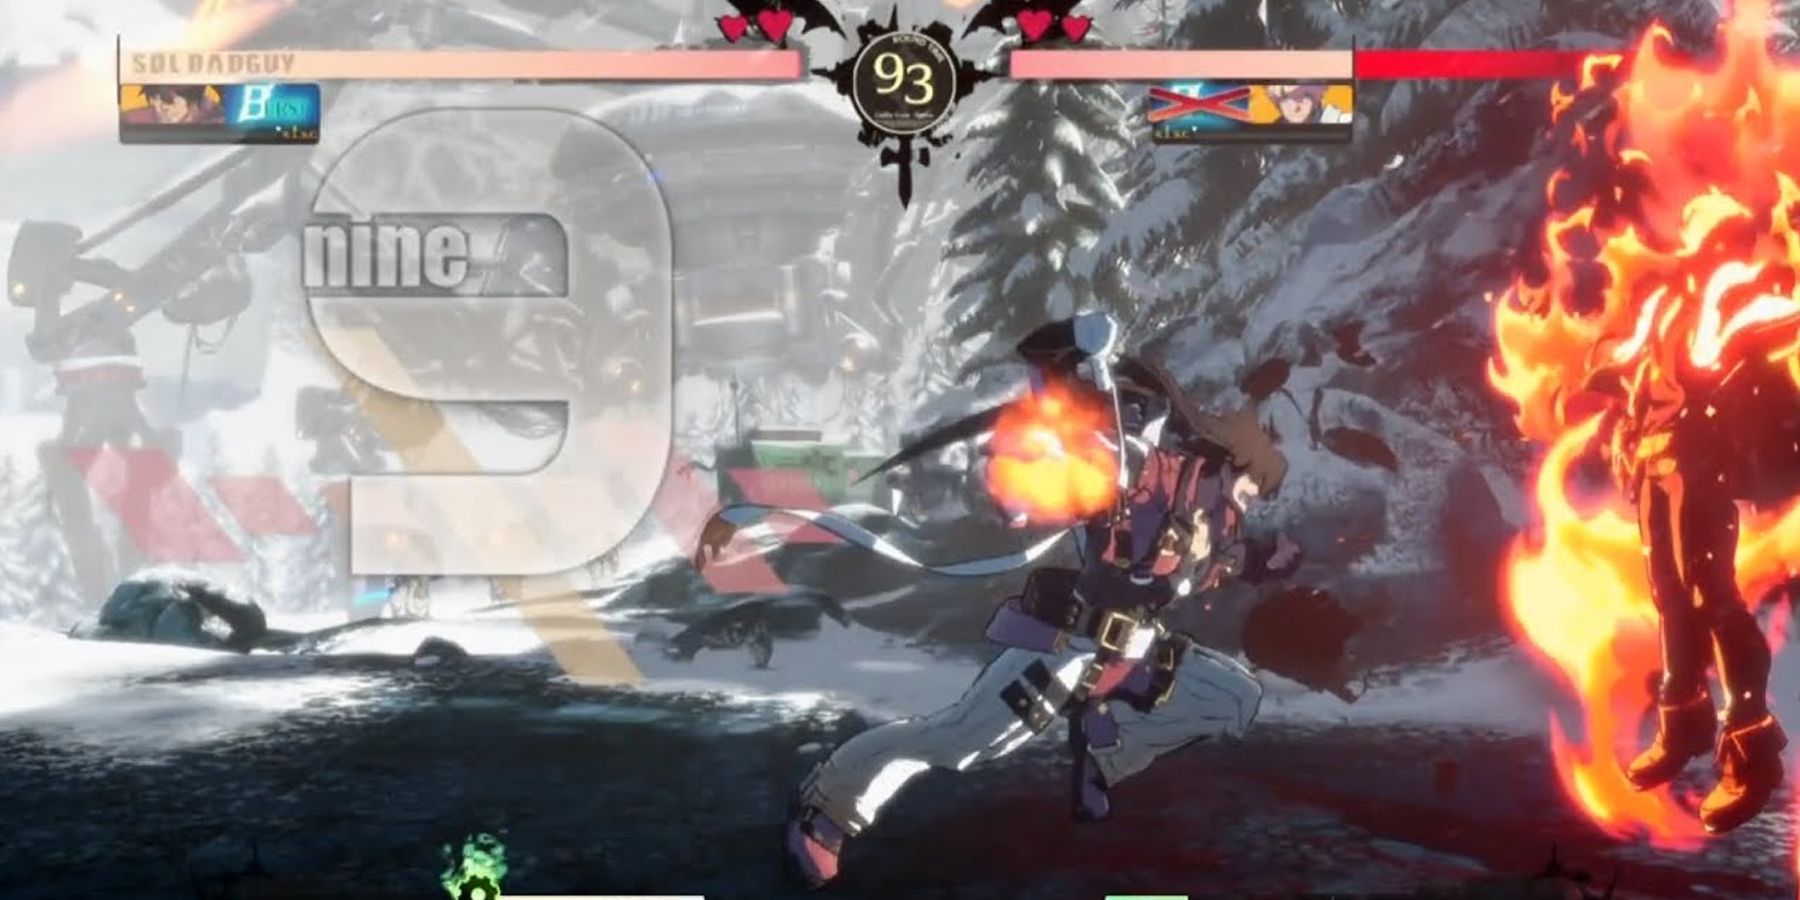 Sol Badguy doing a combo in Guilty Gear Strive